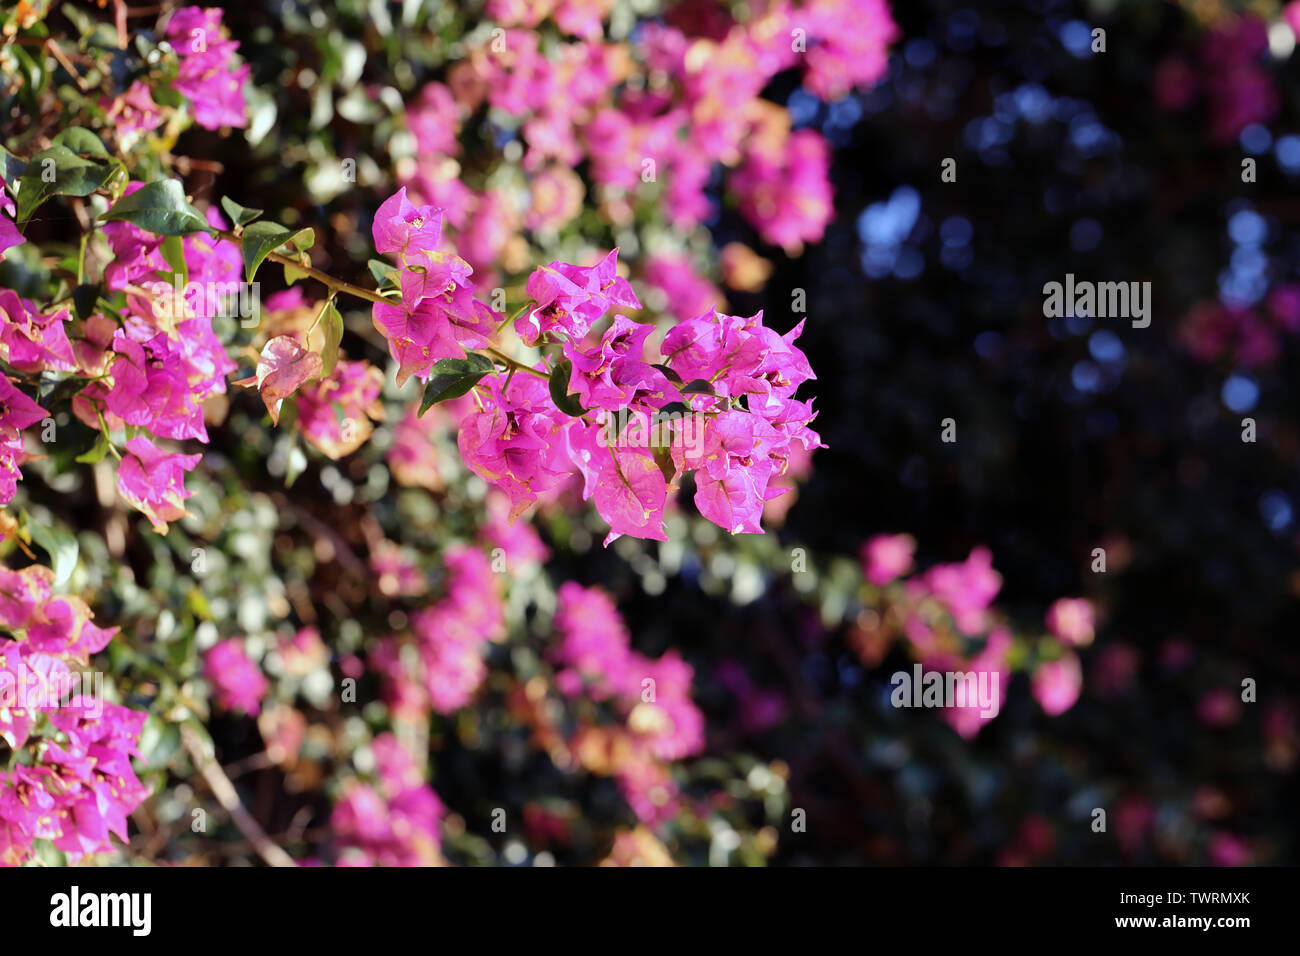 Multiple pink / purple bougainvillea flowers with a dark background. Photographed in the tropical paradise of Madeira, Portugal during a sunny spring. Stock Photo